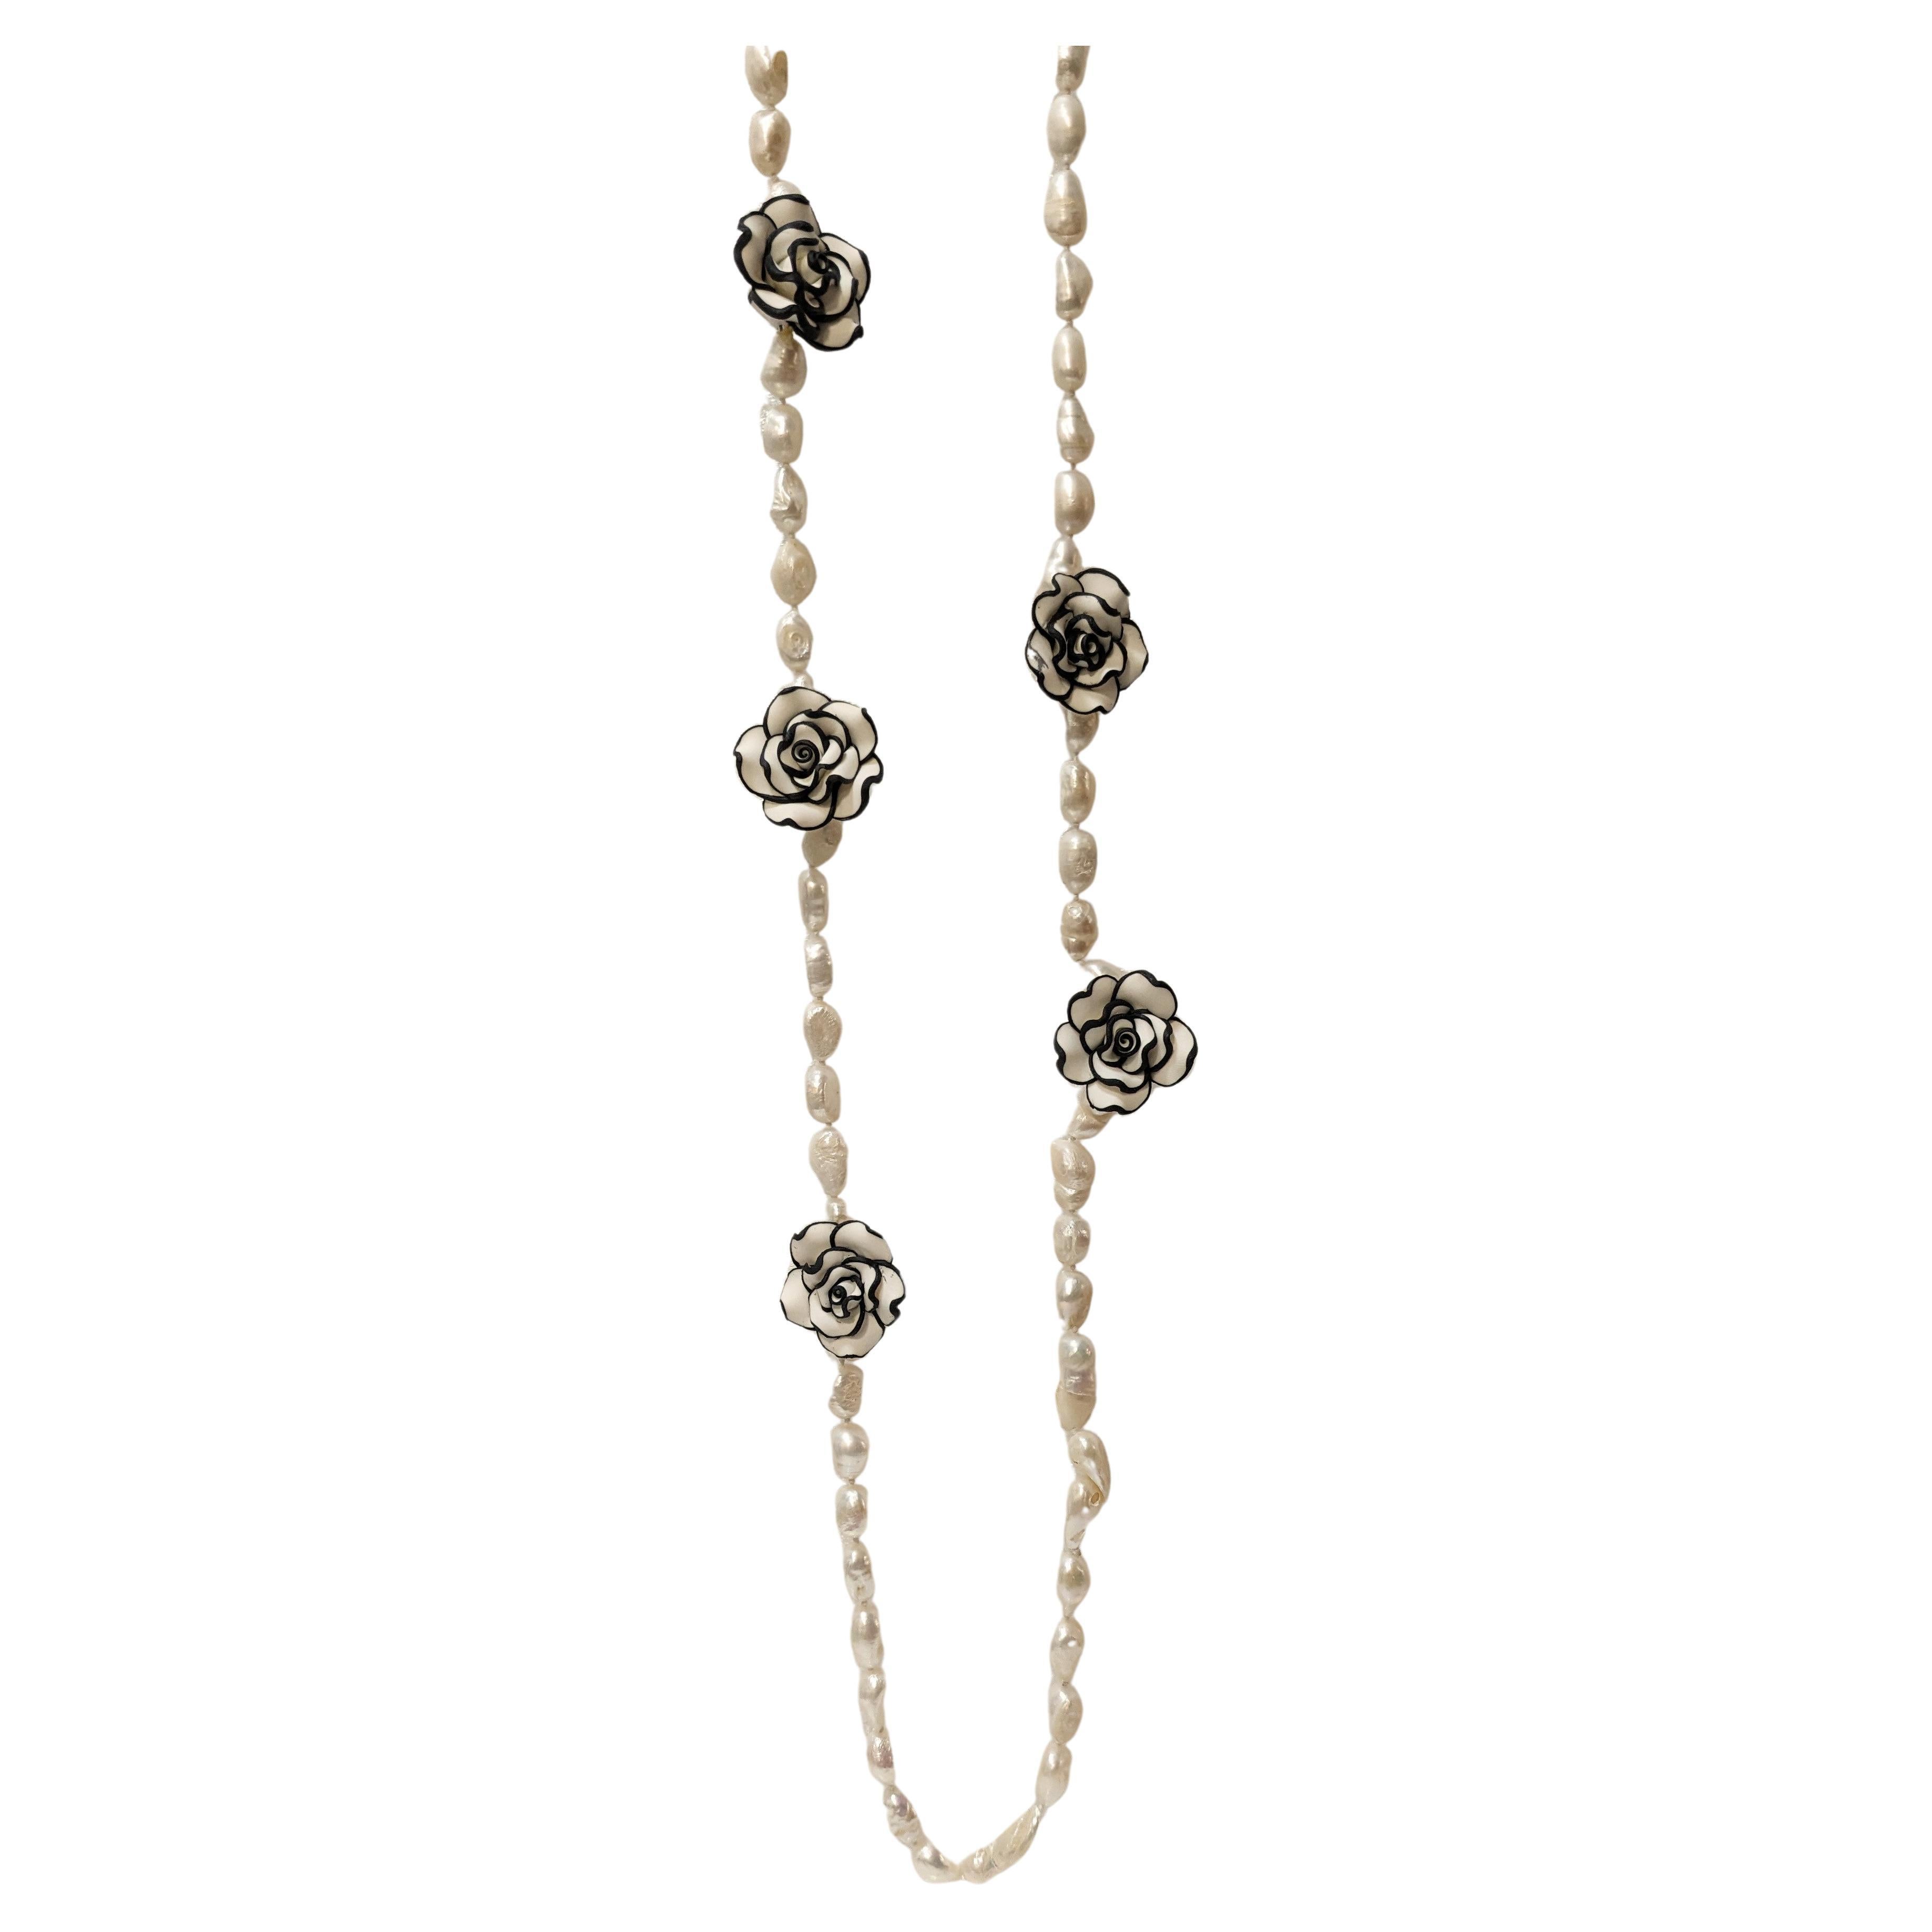  Long River Pearl Necklace with Chanel-type Resin Flowers. For Sale